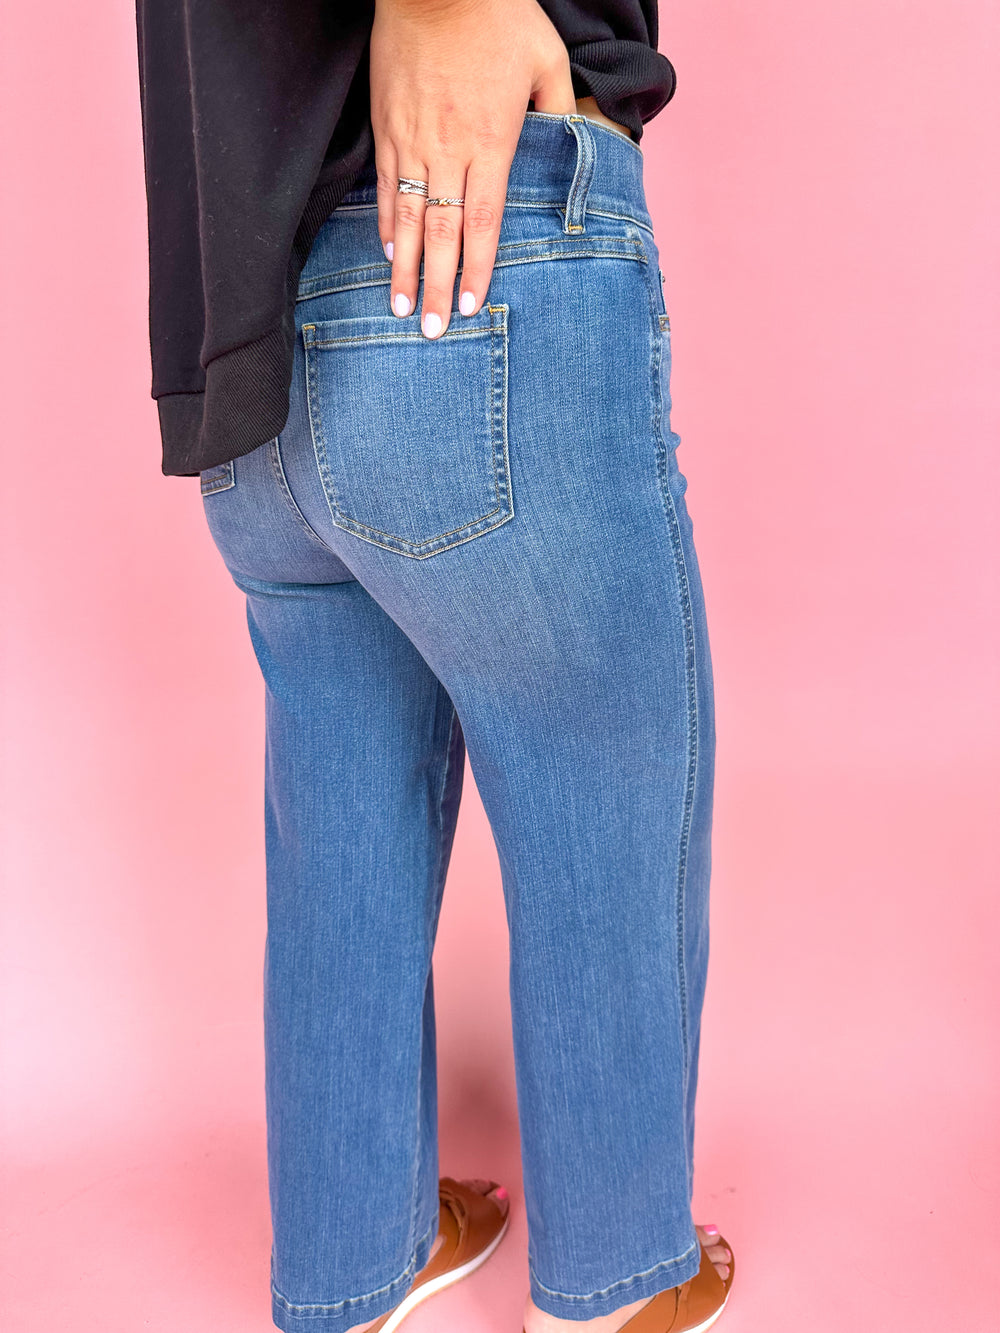 SPANX, Jeans, Spanx Seamed Front Wide Leg Jeans Blue